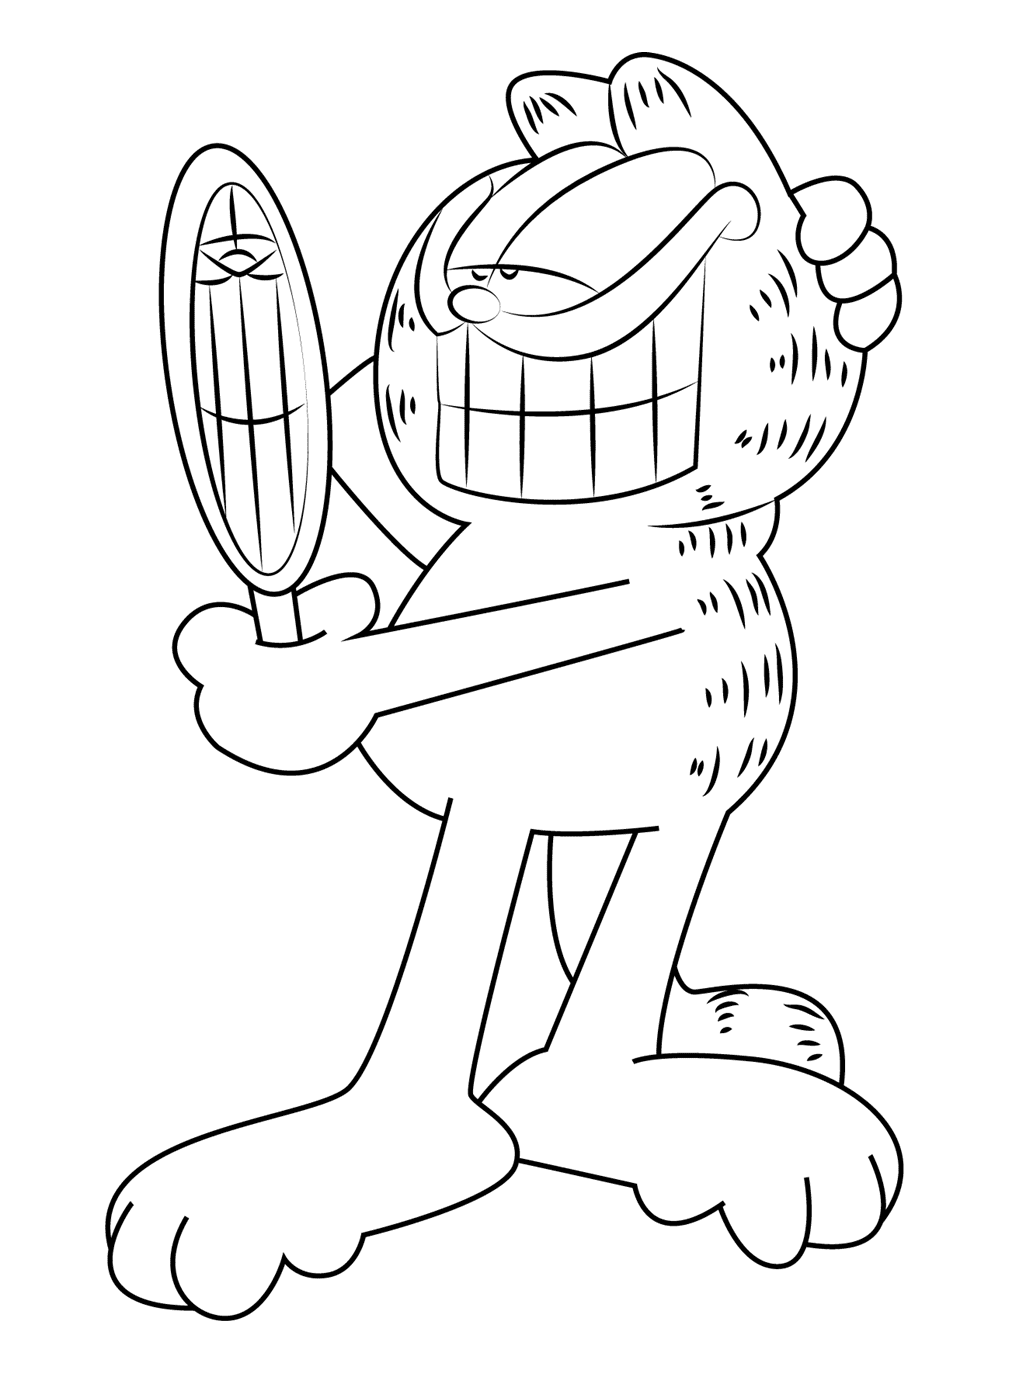 Garfield see in Mirror Coloring Page